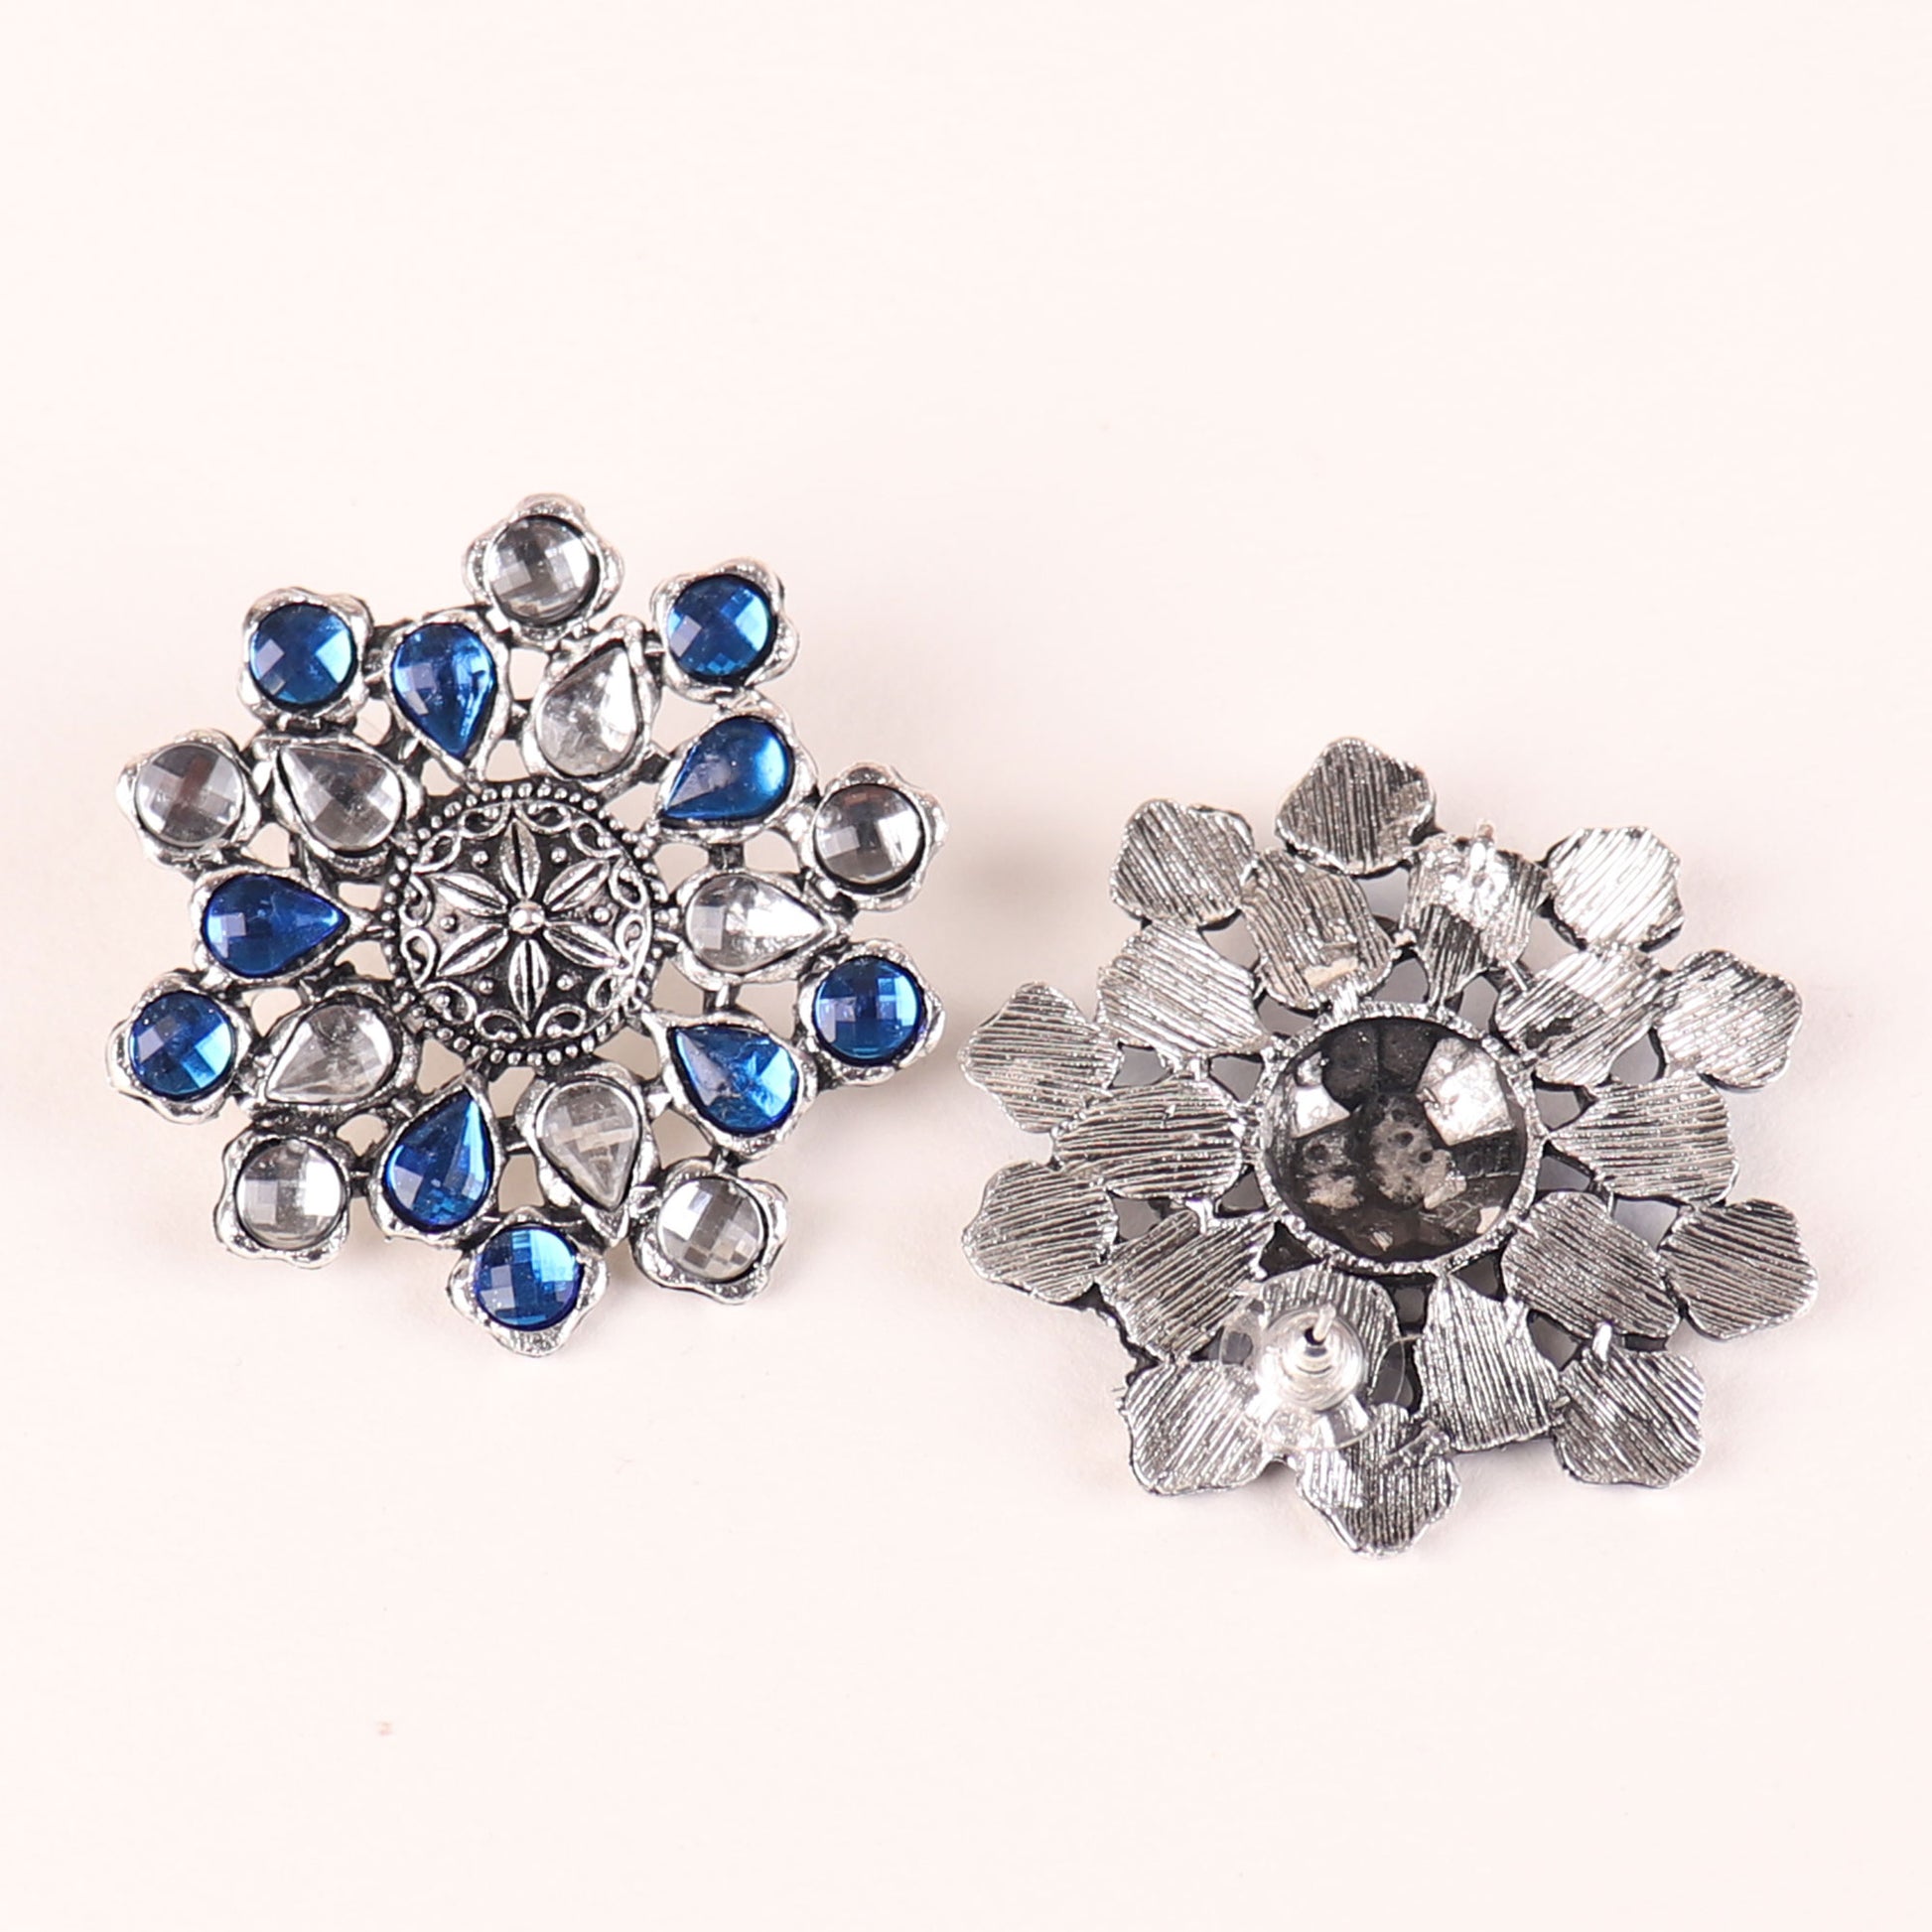 Earrings,The Pearl Hive Studs in Blue - Cippele Multi Store